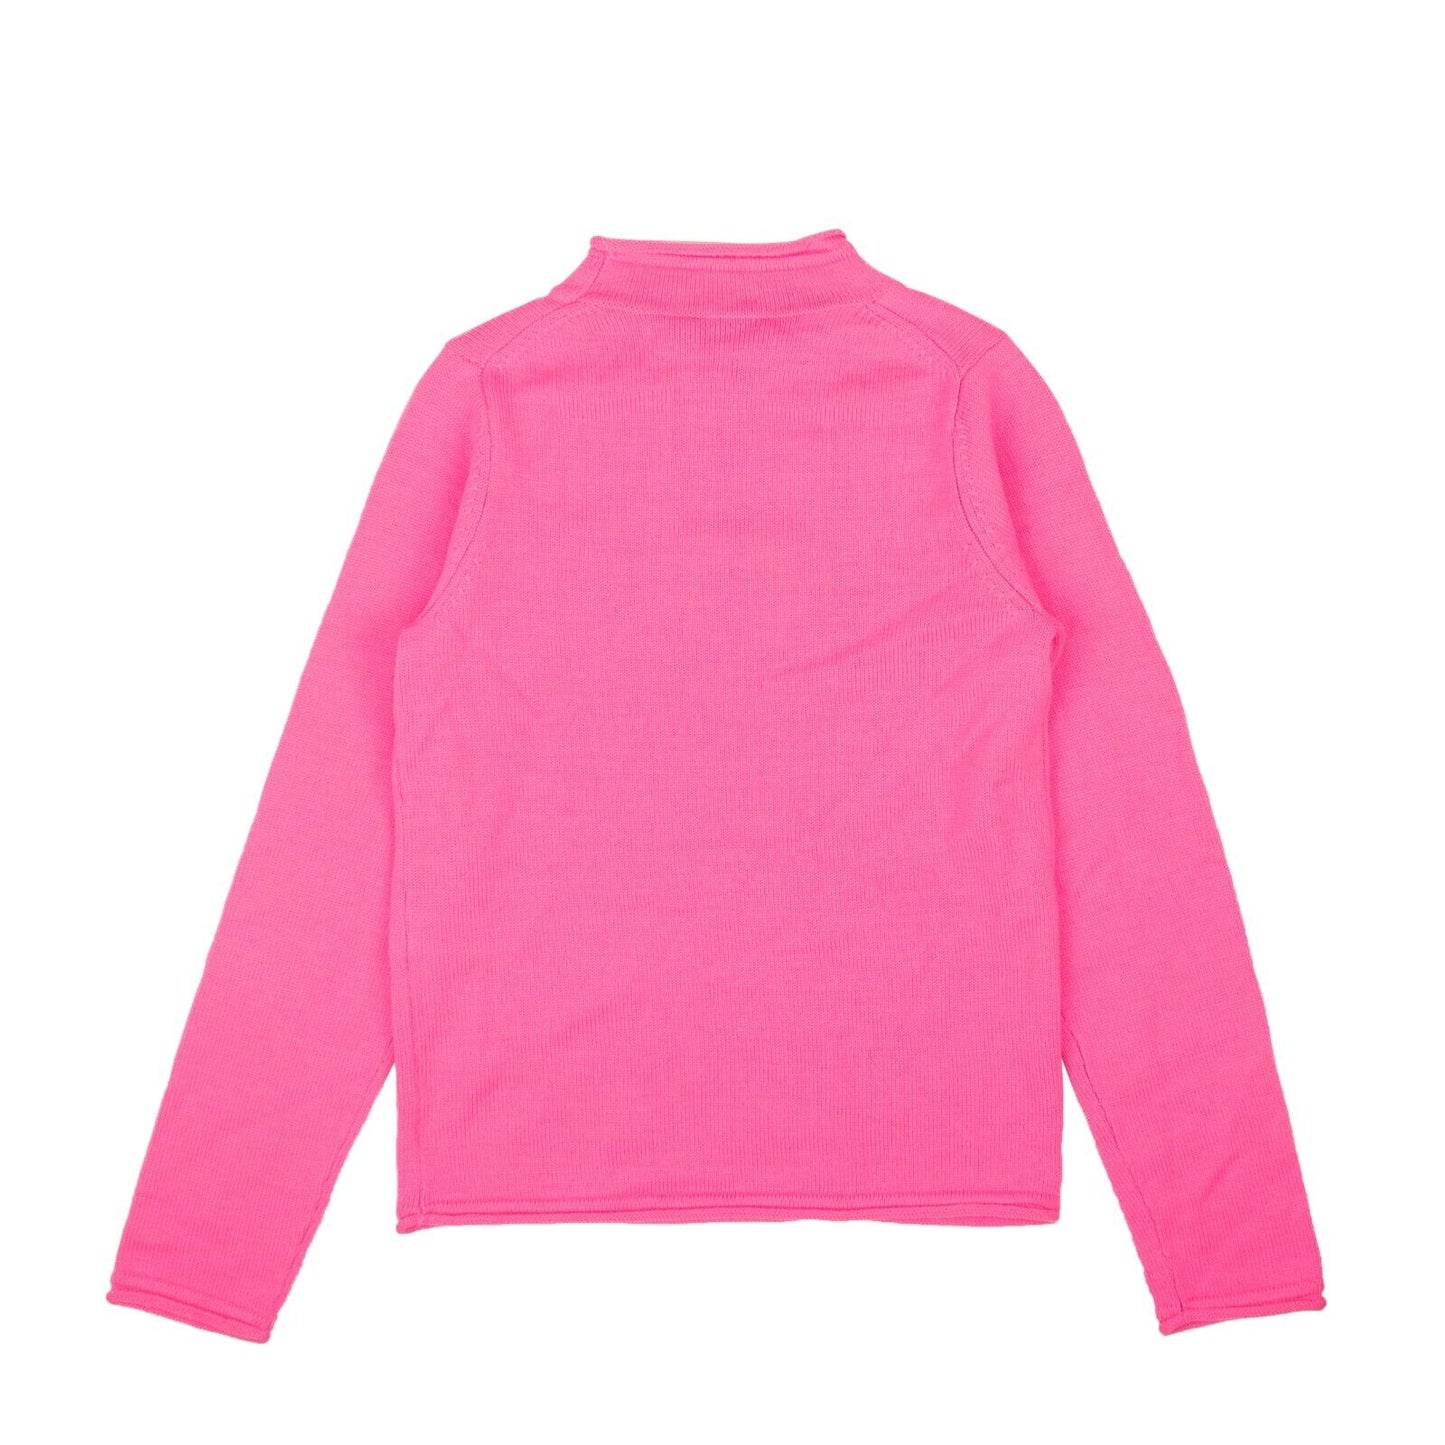 Opening Ceremony L/S Fluo Knit - Pink